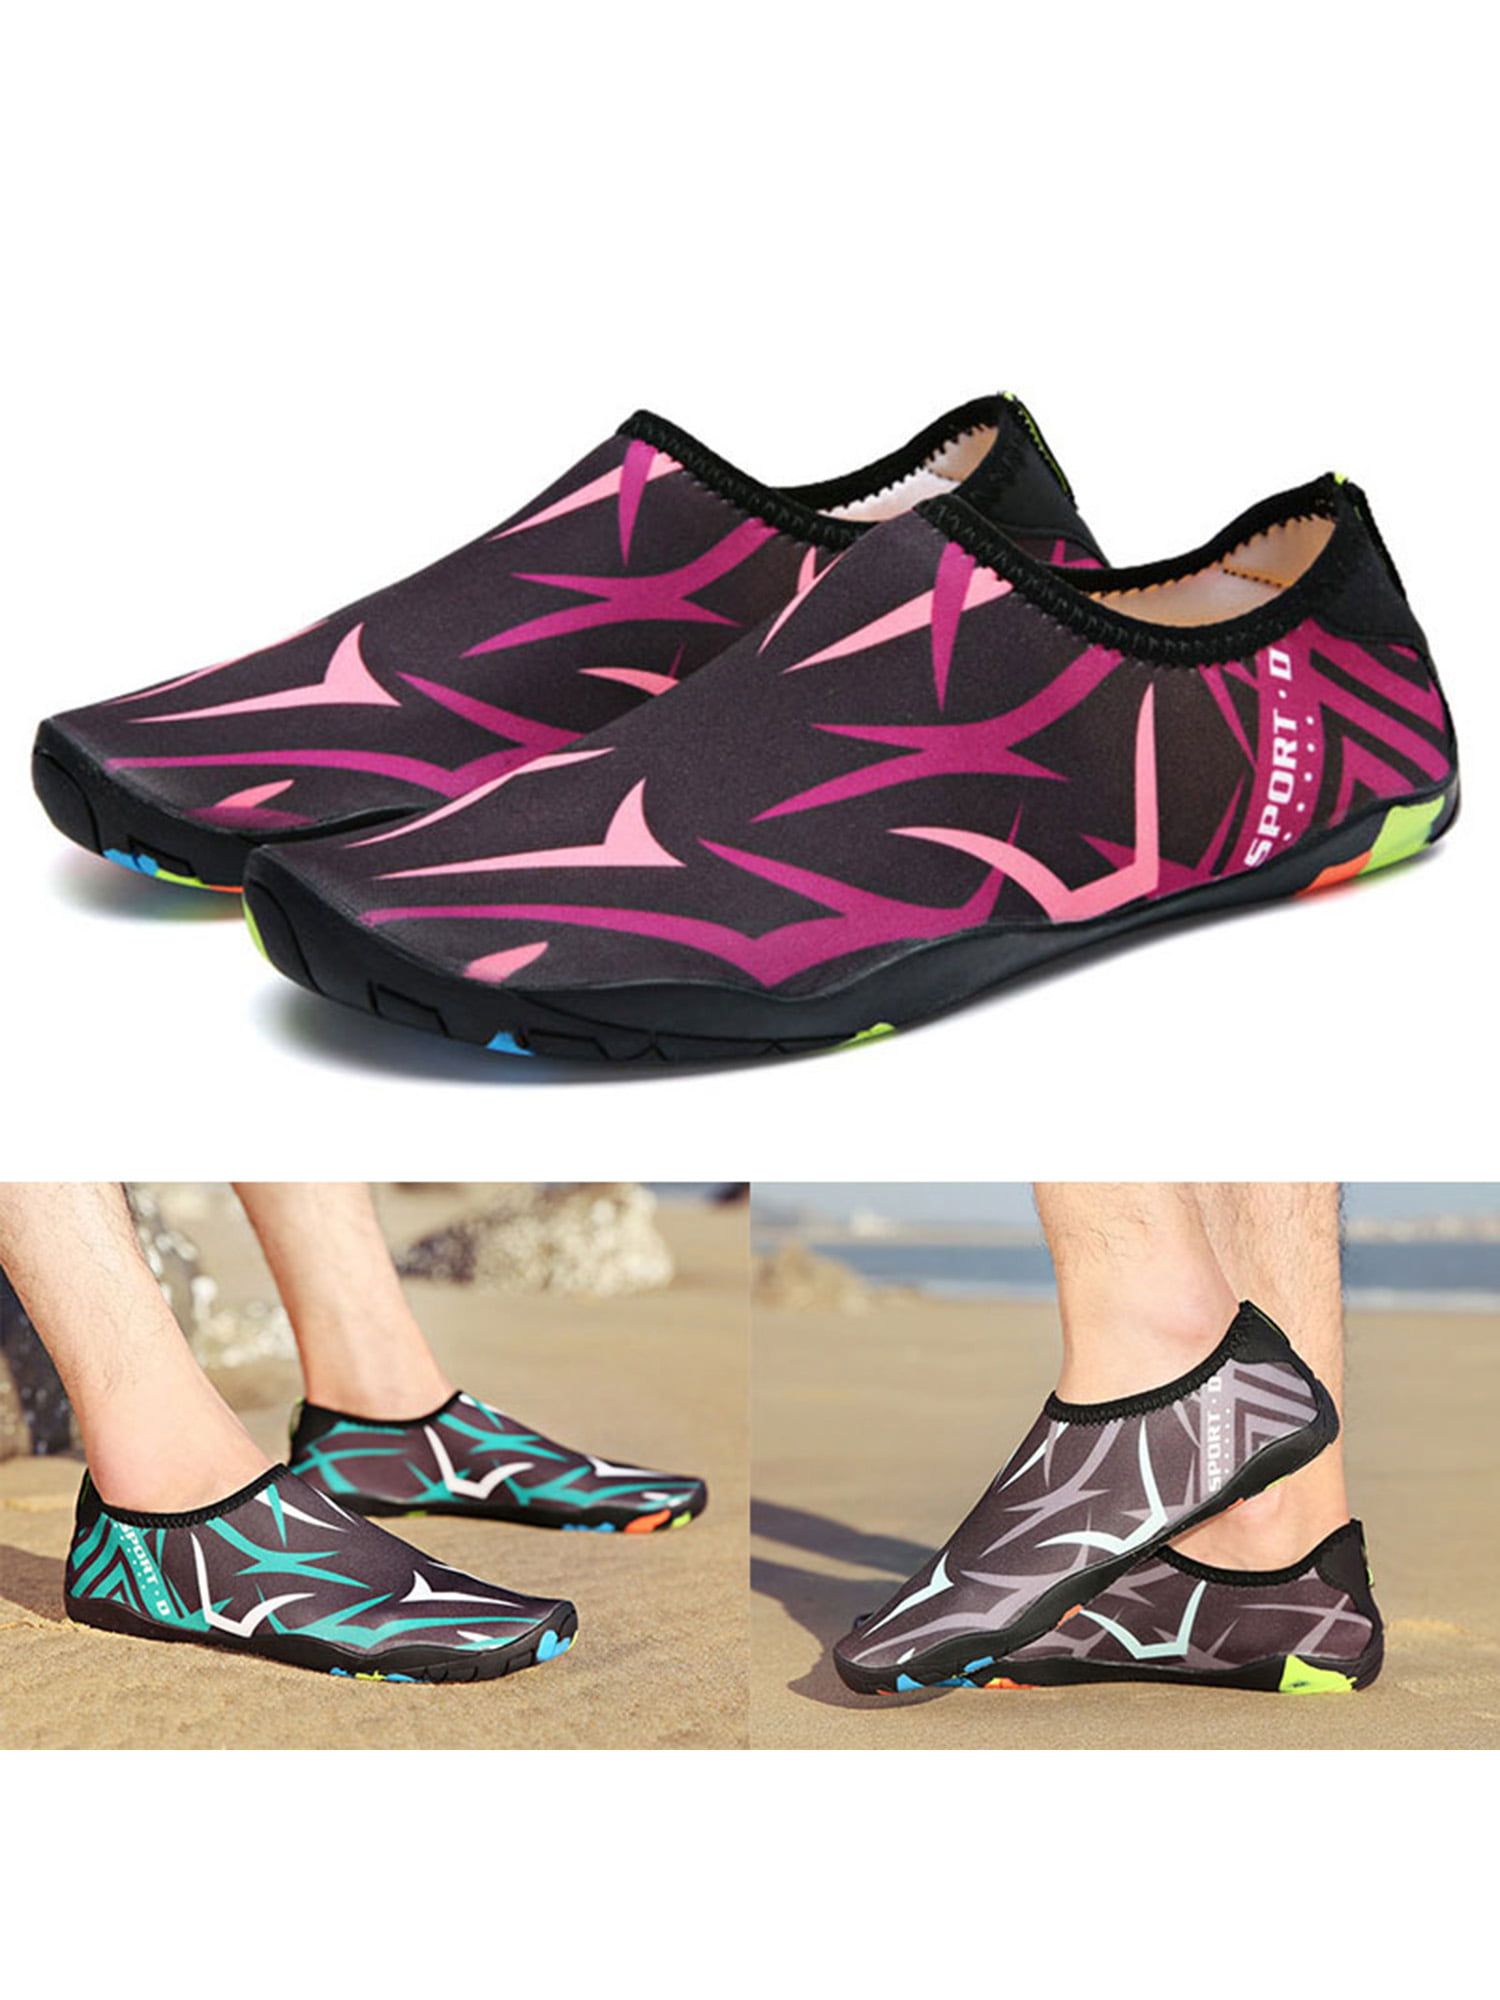 Womens Water Shoes Barefoot Quick Dry for Diving Swim Surf Aqua Sports Pool Beac 